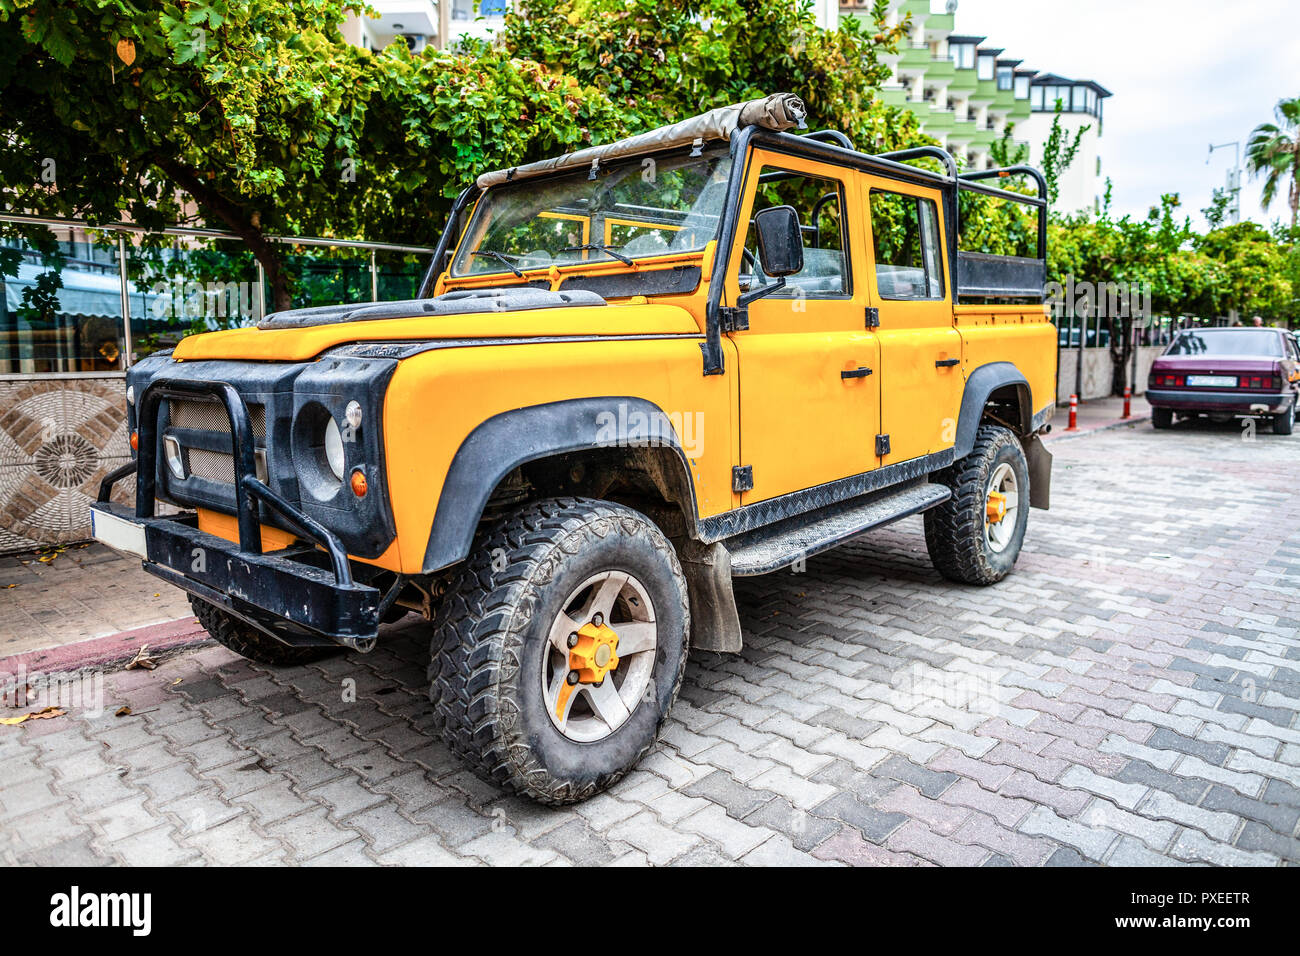 Yellow offroad vehicle stands on a street Stock Photo